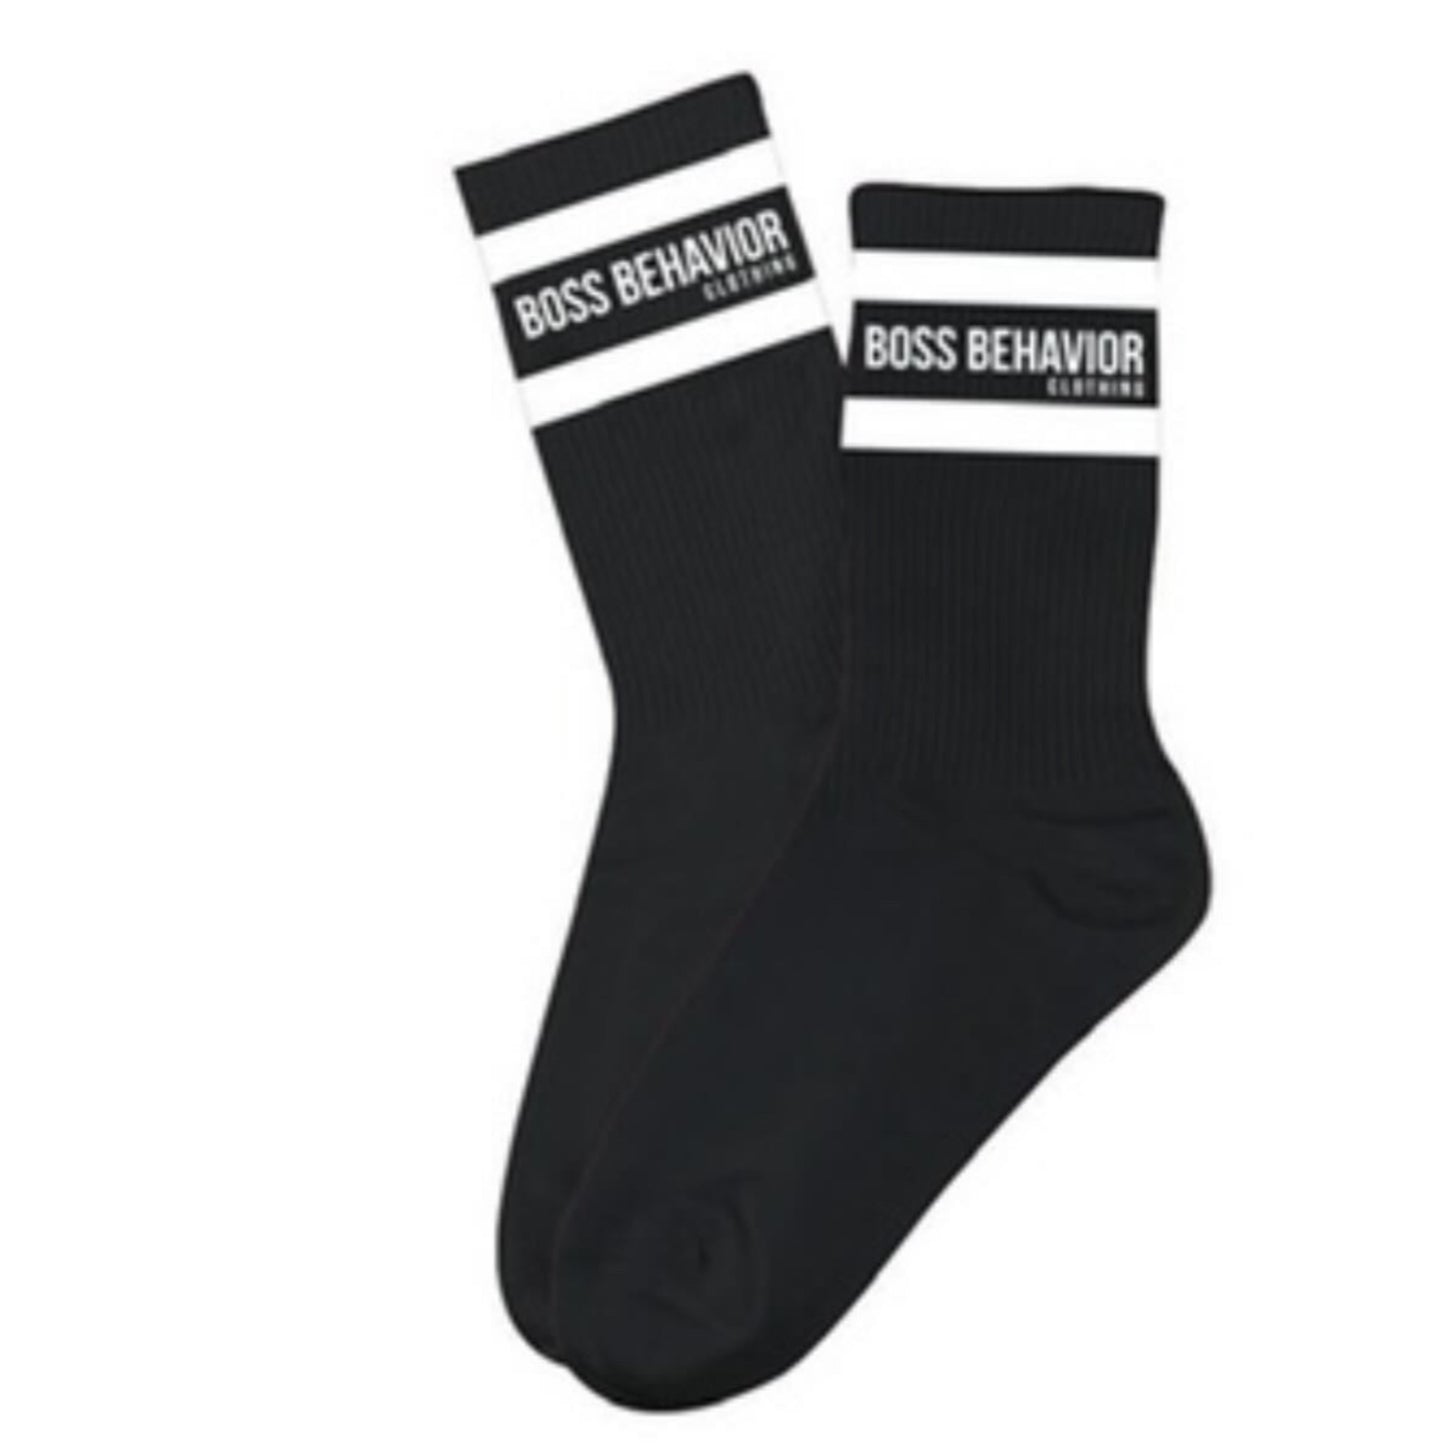 Socks : Boss Behavior Crew Socks (One Size Fit All) More Colors Available